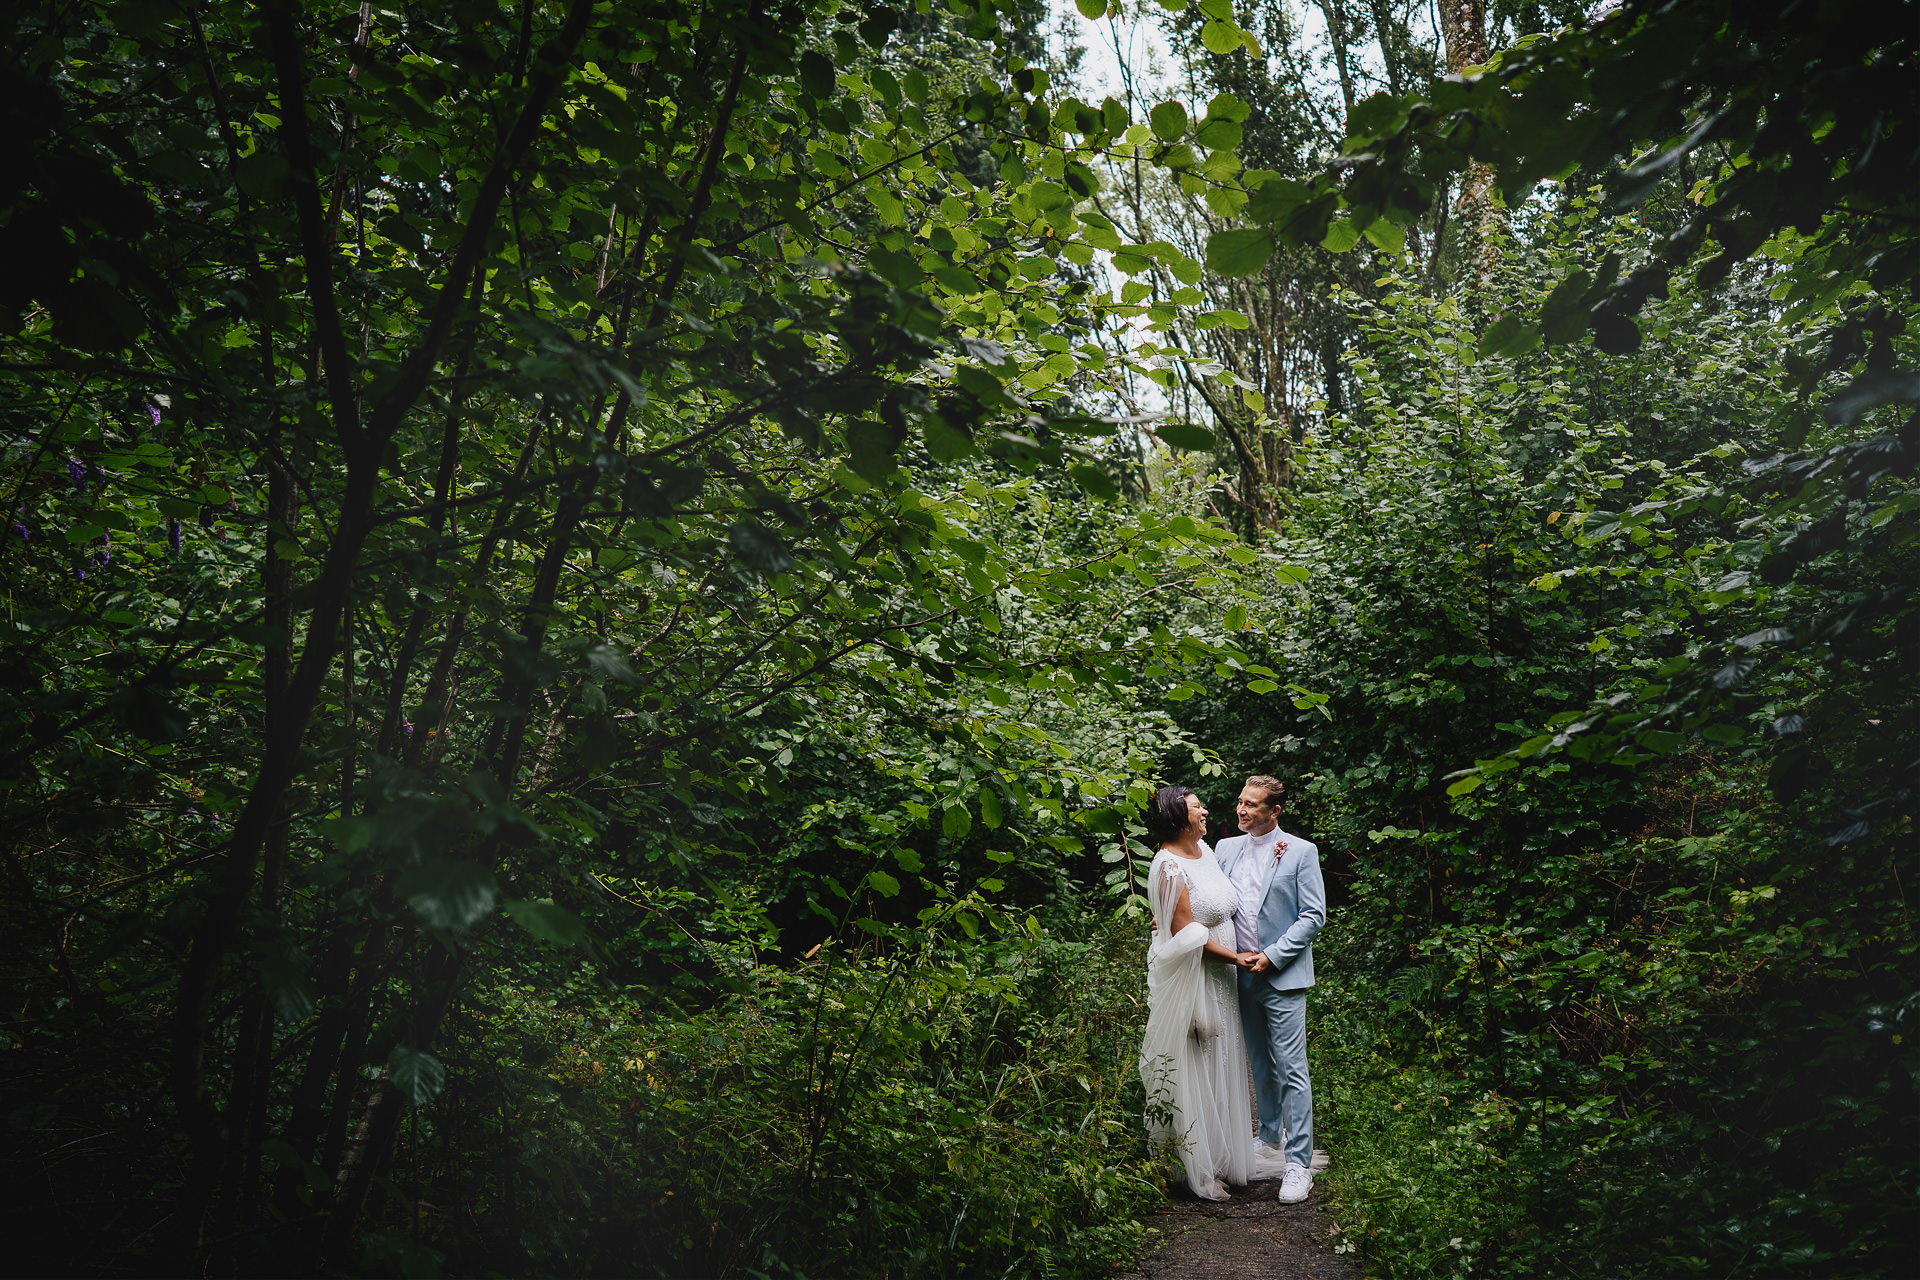 Bride and groom in a woodland wedding setting